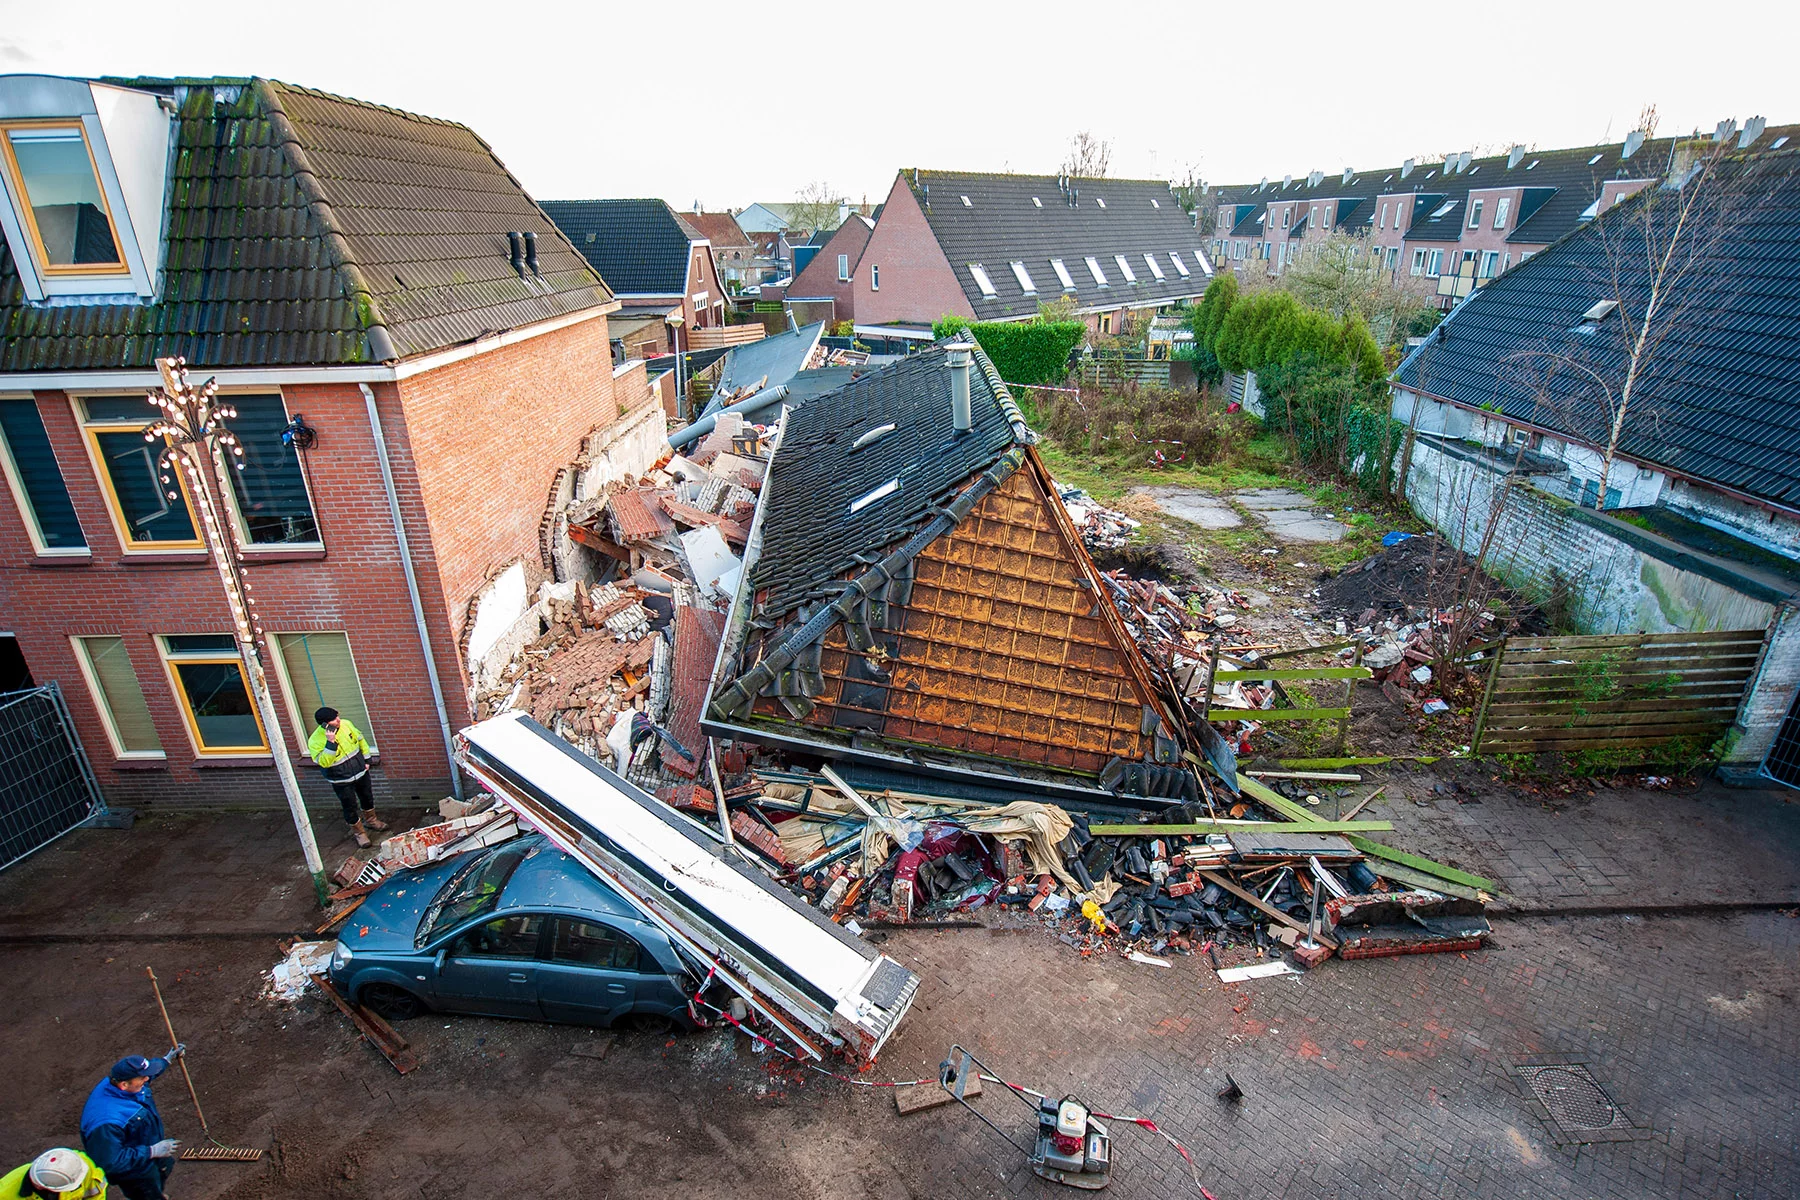 Collapsed home in Coevorden, the Netherlands